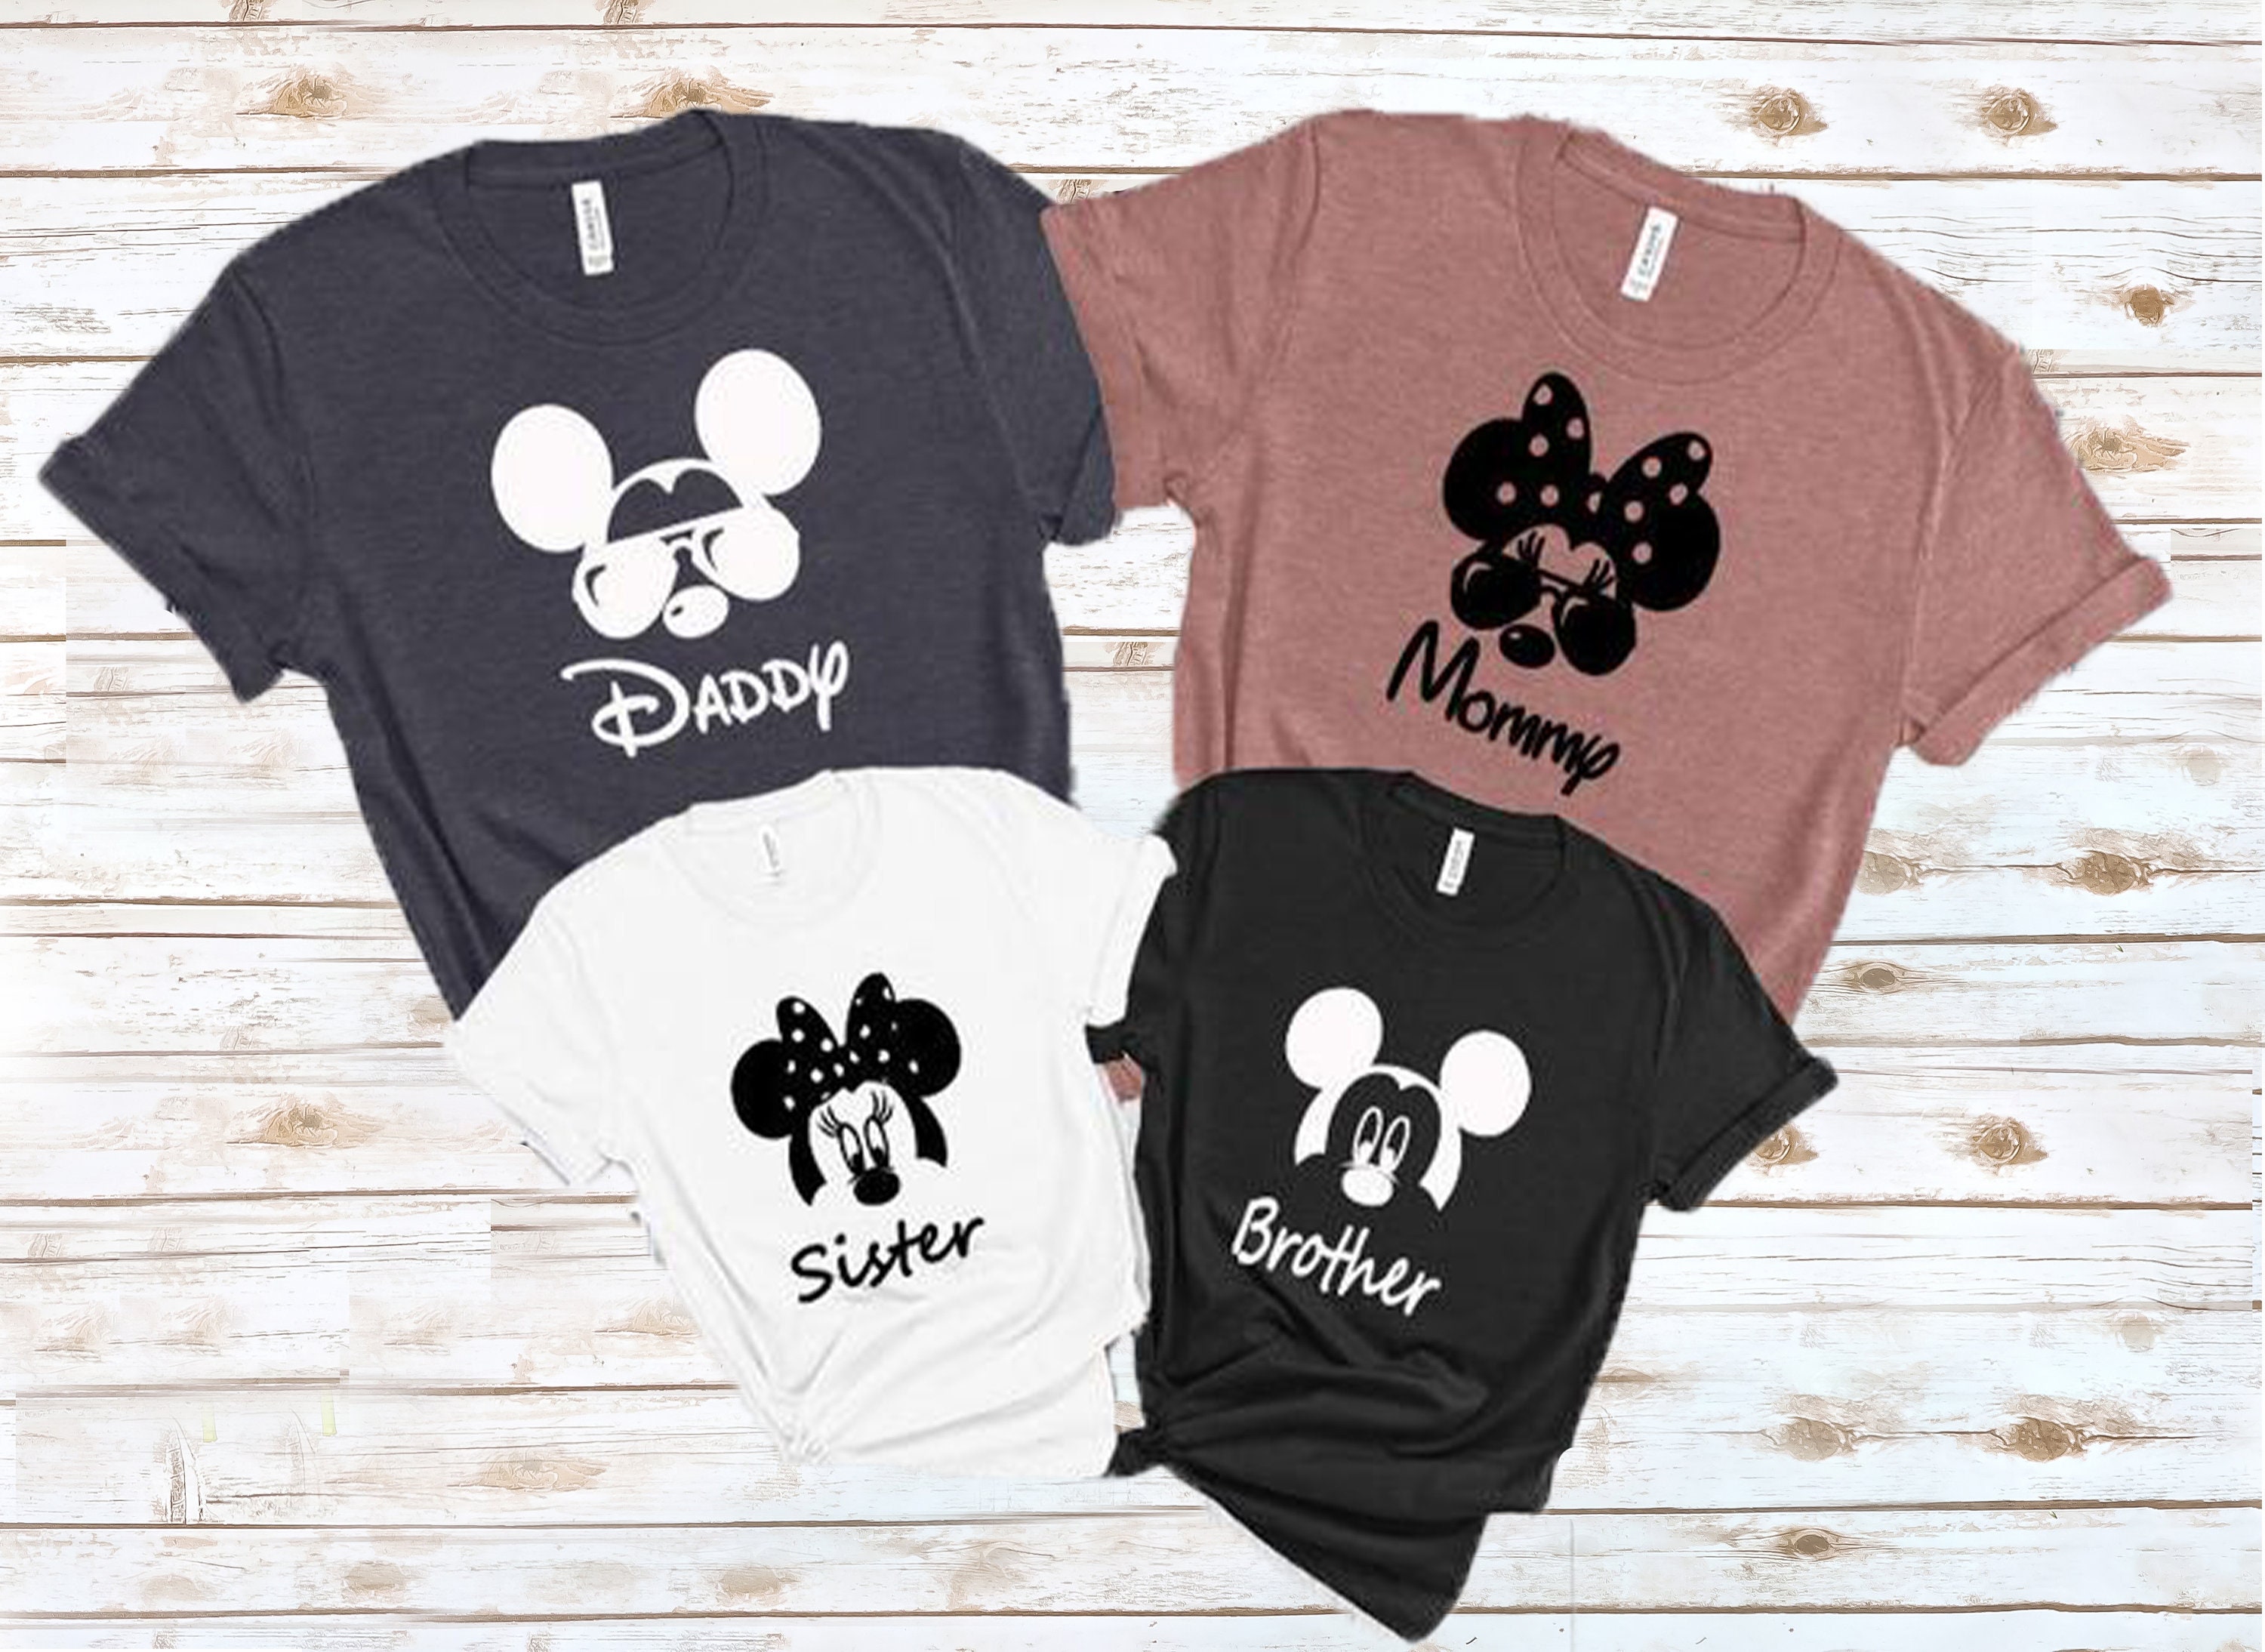 Daddy Disney Shirt Mommy Shirt Sister Brother Matching Top | Etsy